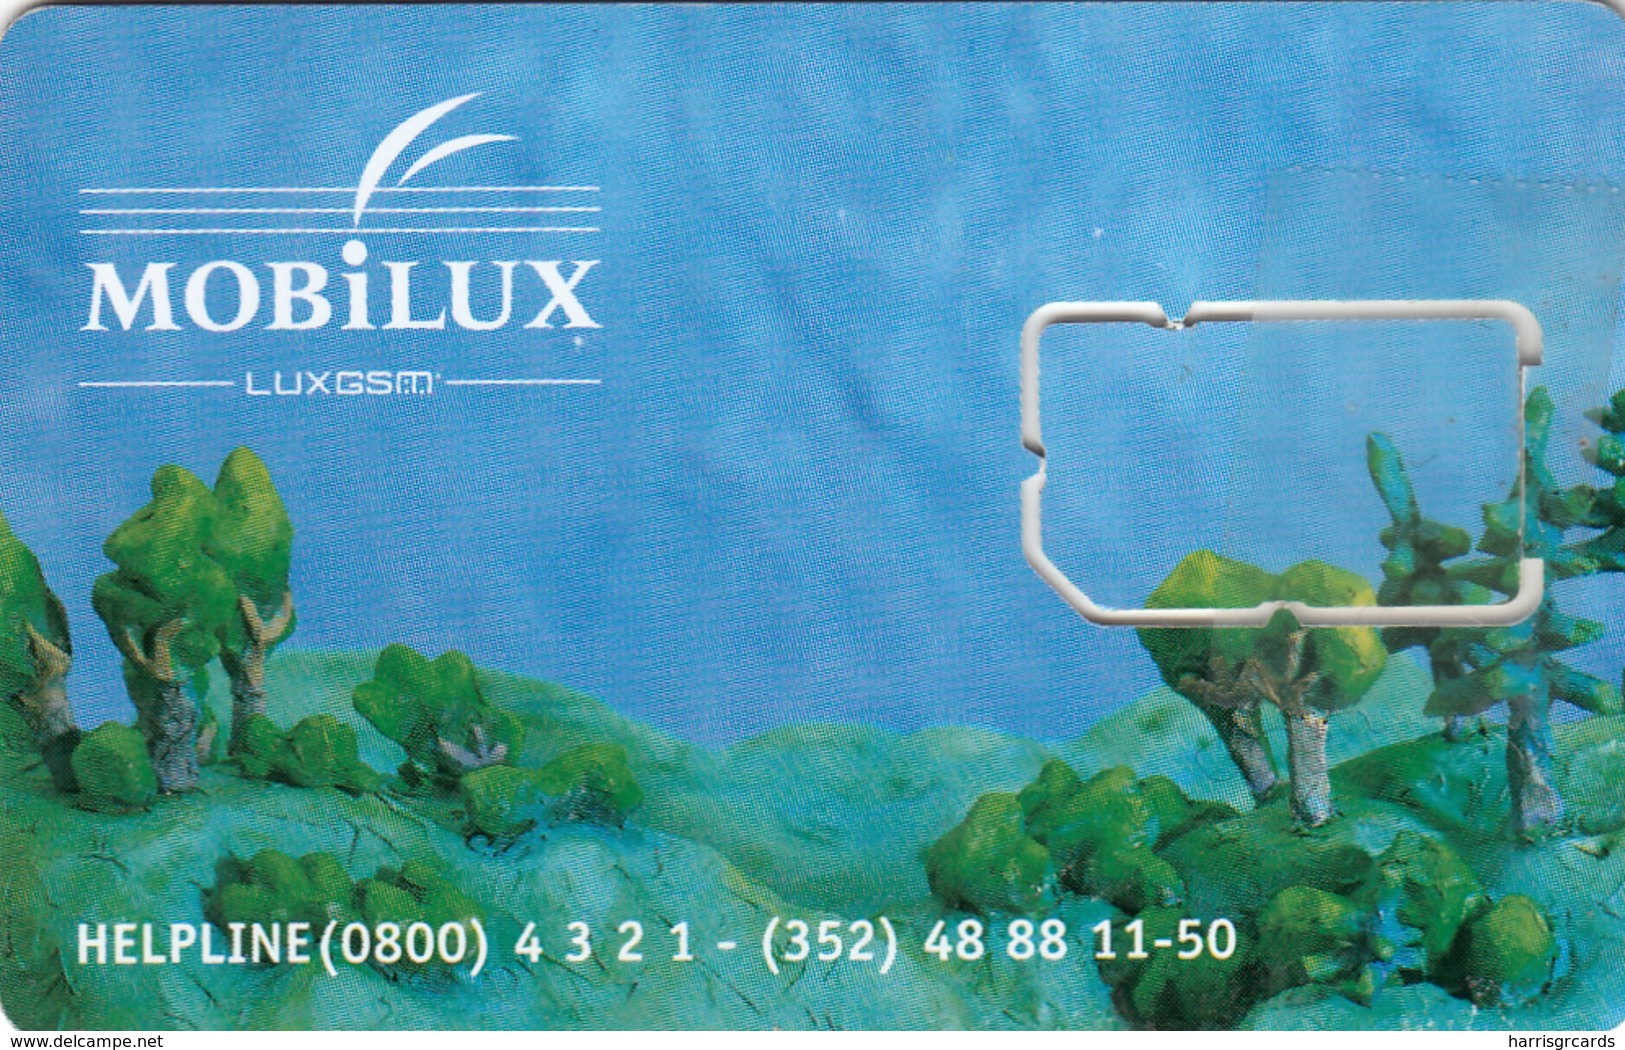 LUXEMBUOURG - Mobilux Earth, Reverse Mobilux Helpline (0800) 4 3 2 1 GSM Card, Used - Luxembourg